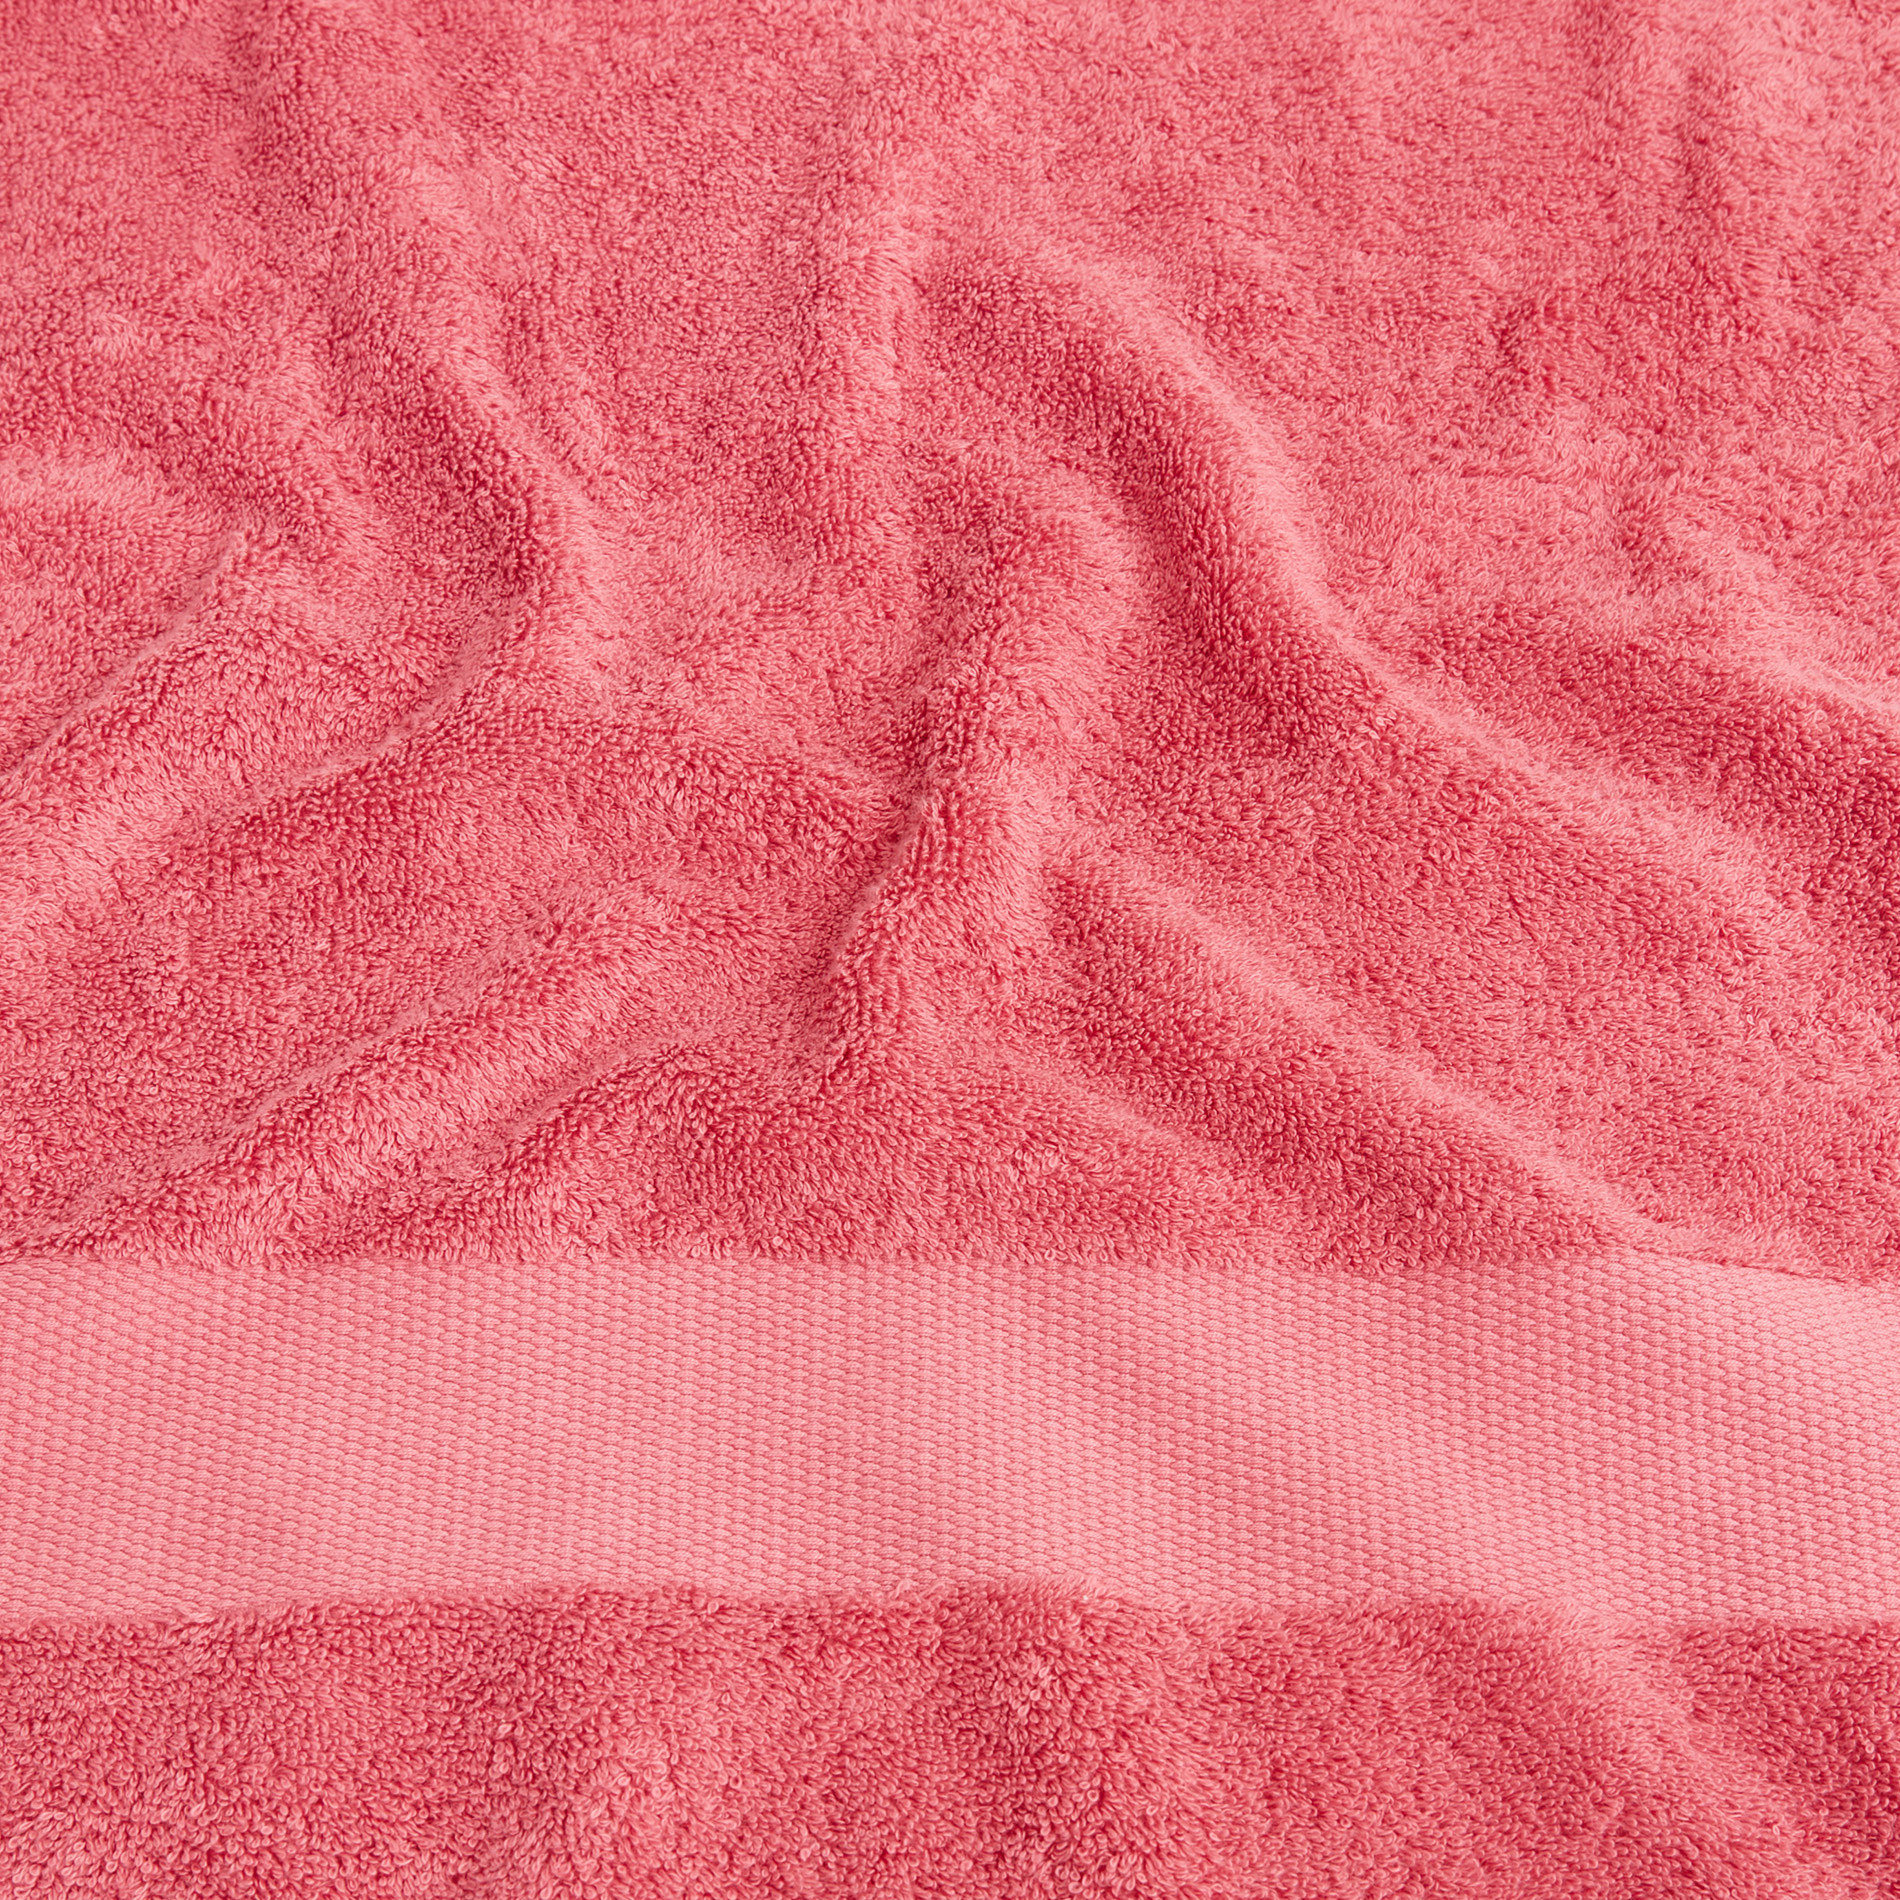 Zefiro pure cotton terry towel, Strawberry Red, large